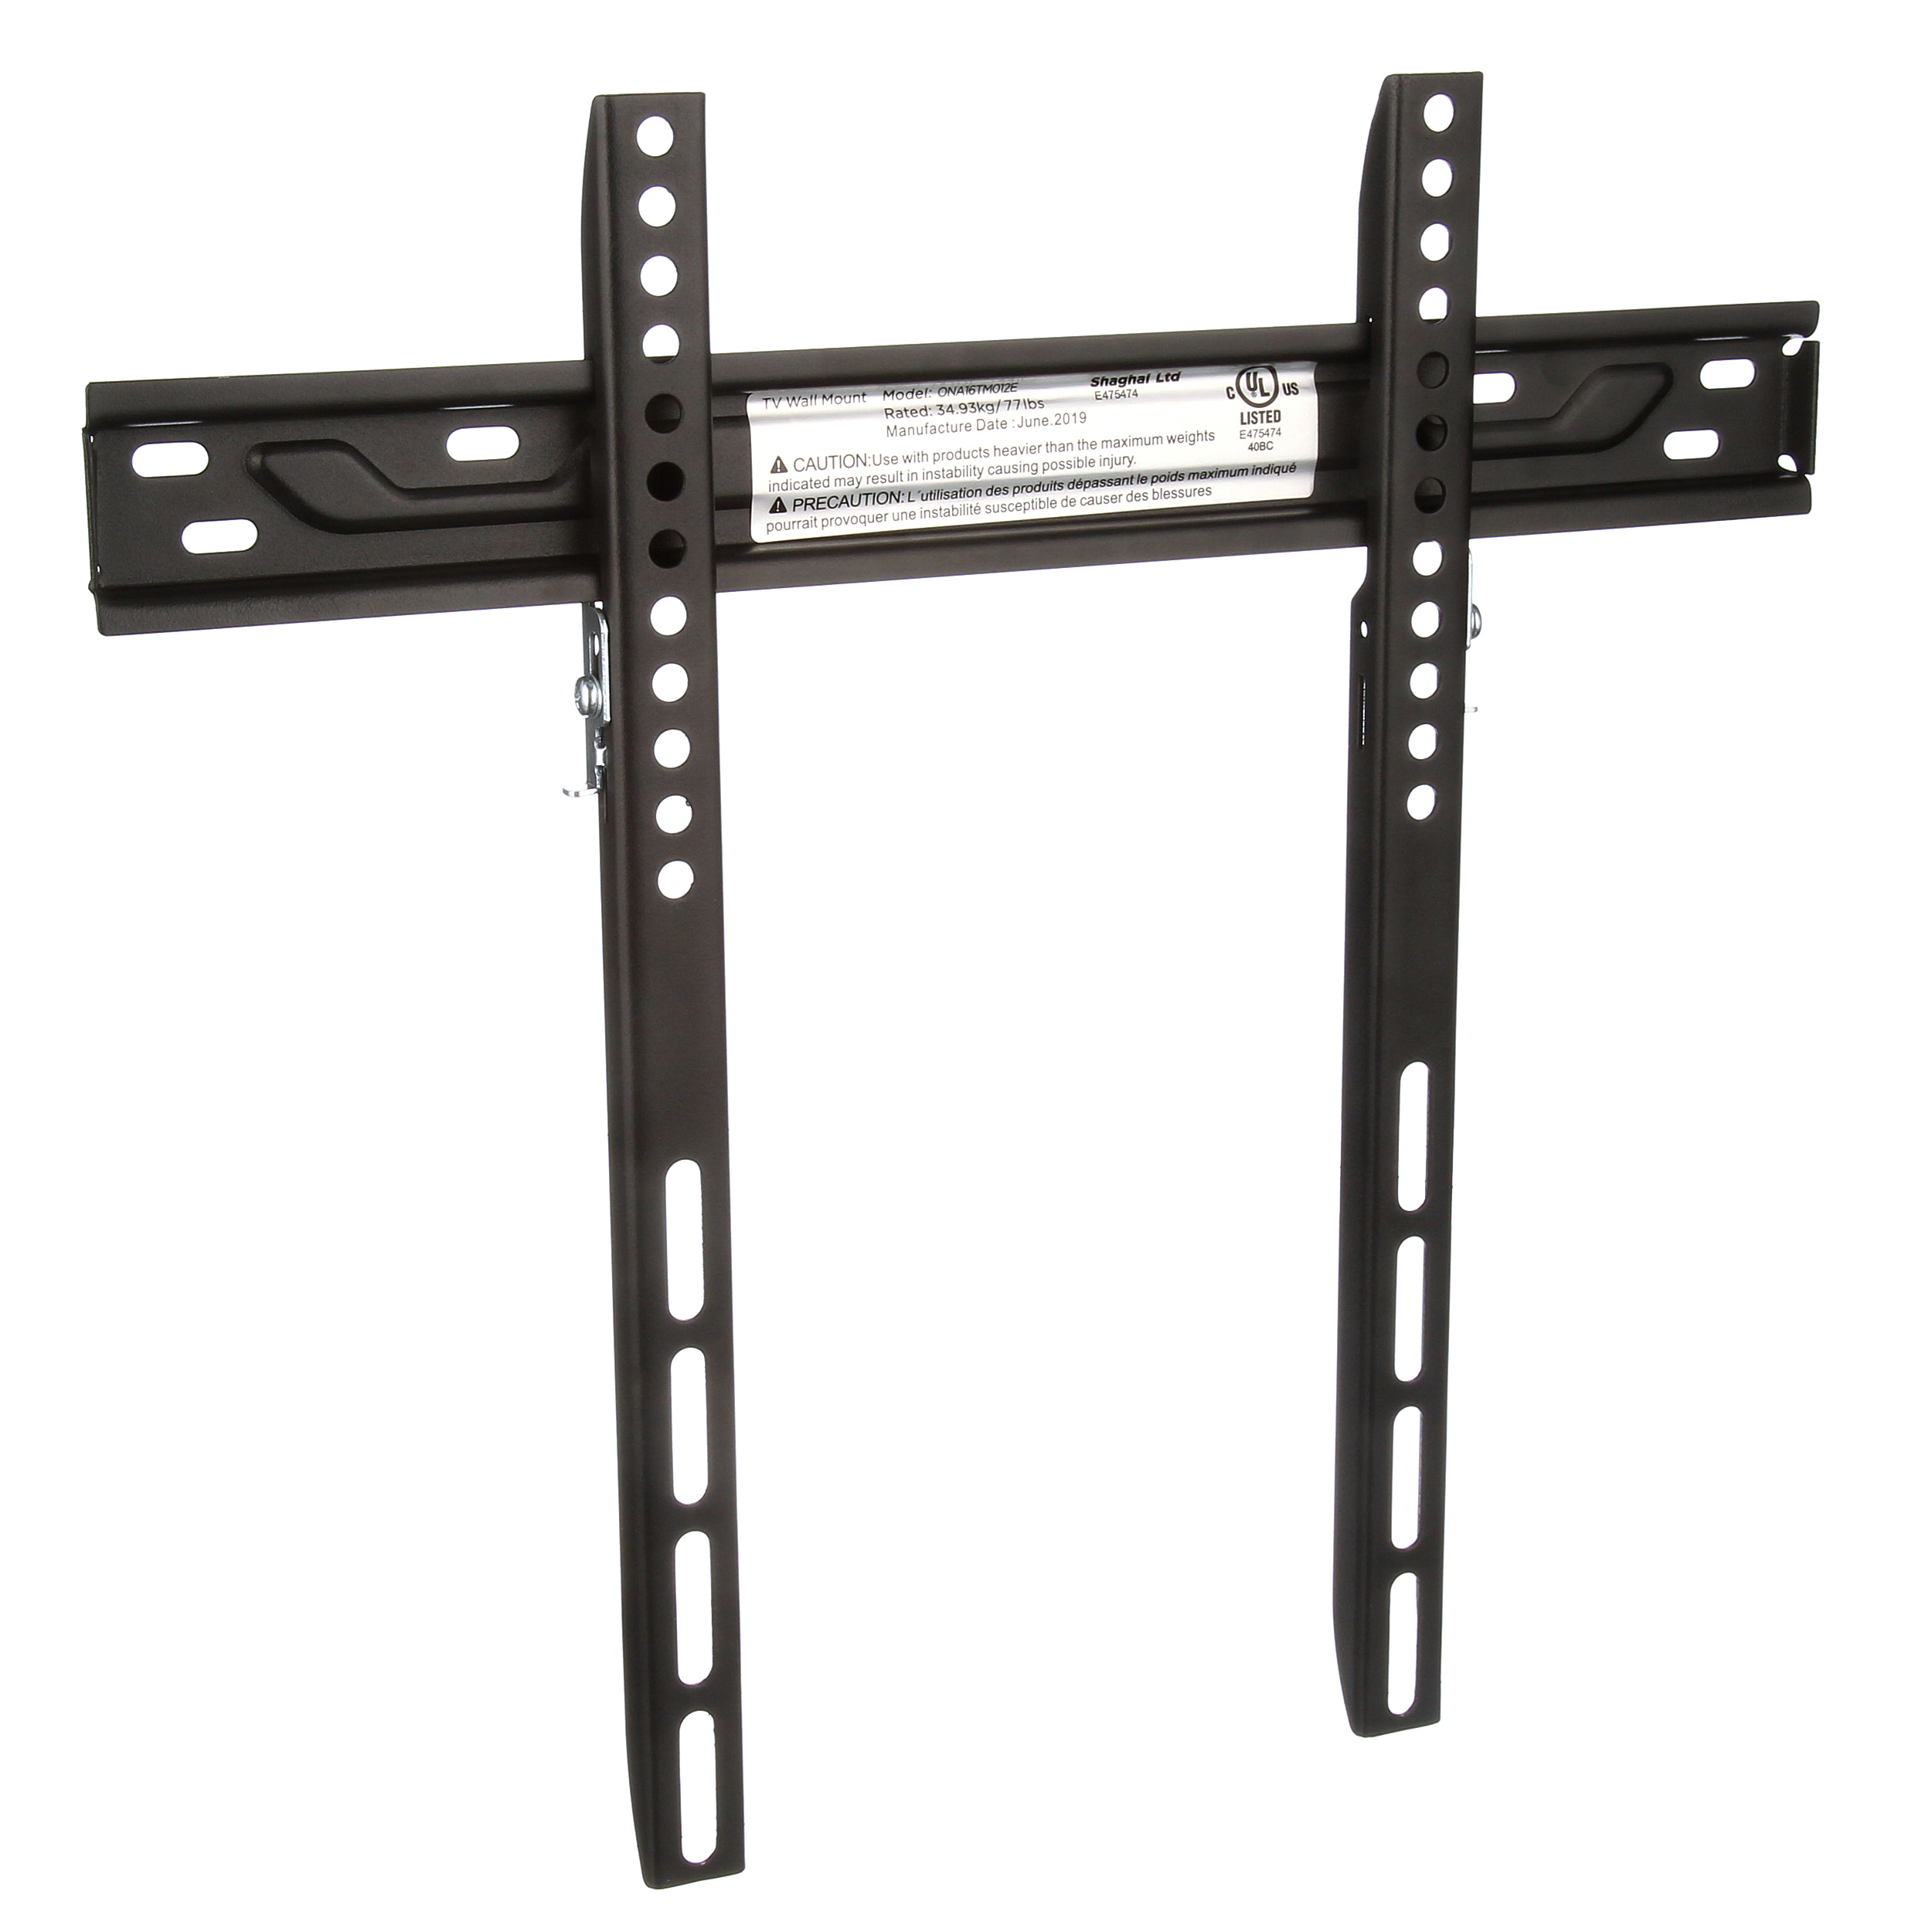 DuraPro Universal Low-Profile Wall Mount for 19" to 60" TVs + Bonus HDMI Cable (DRP650FD) - image 4 of 7